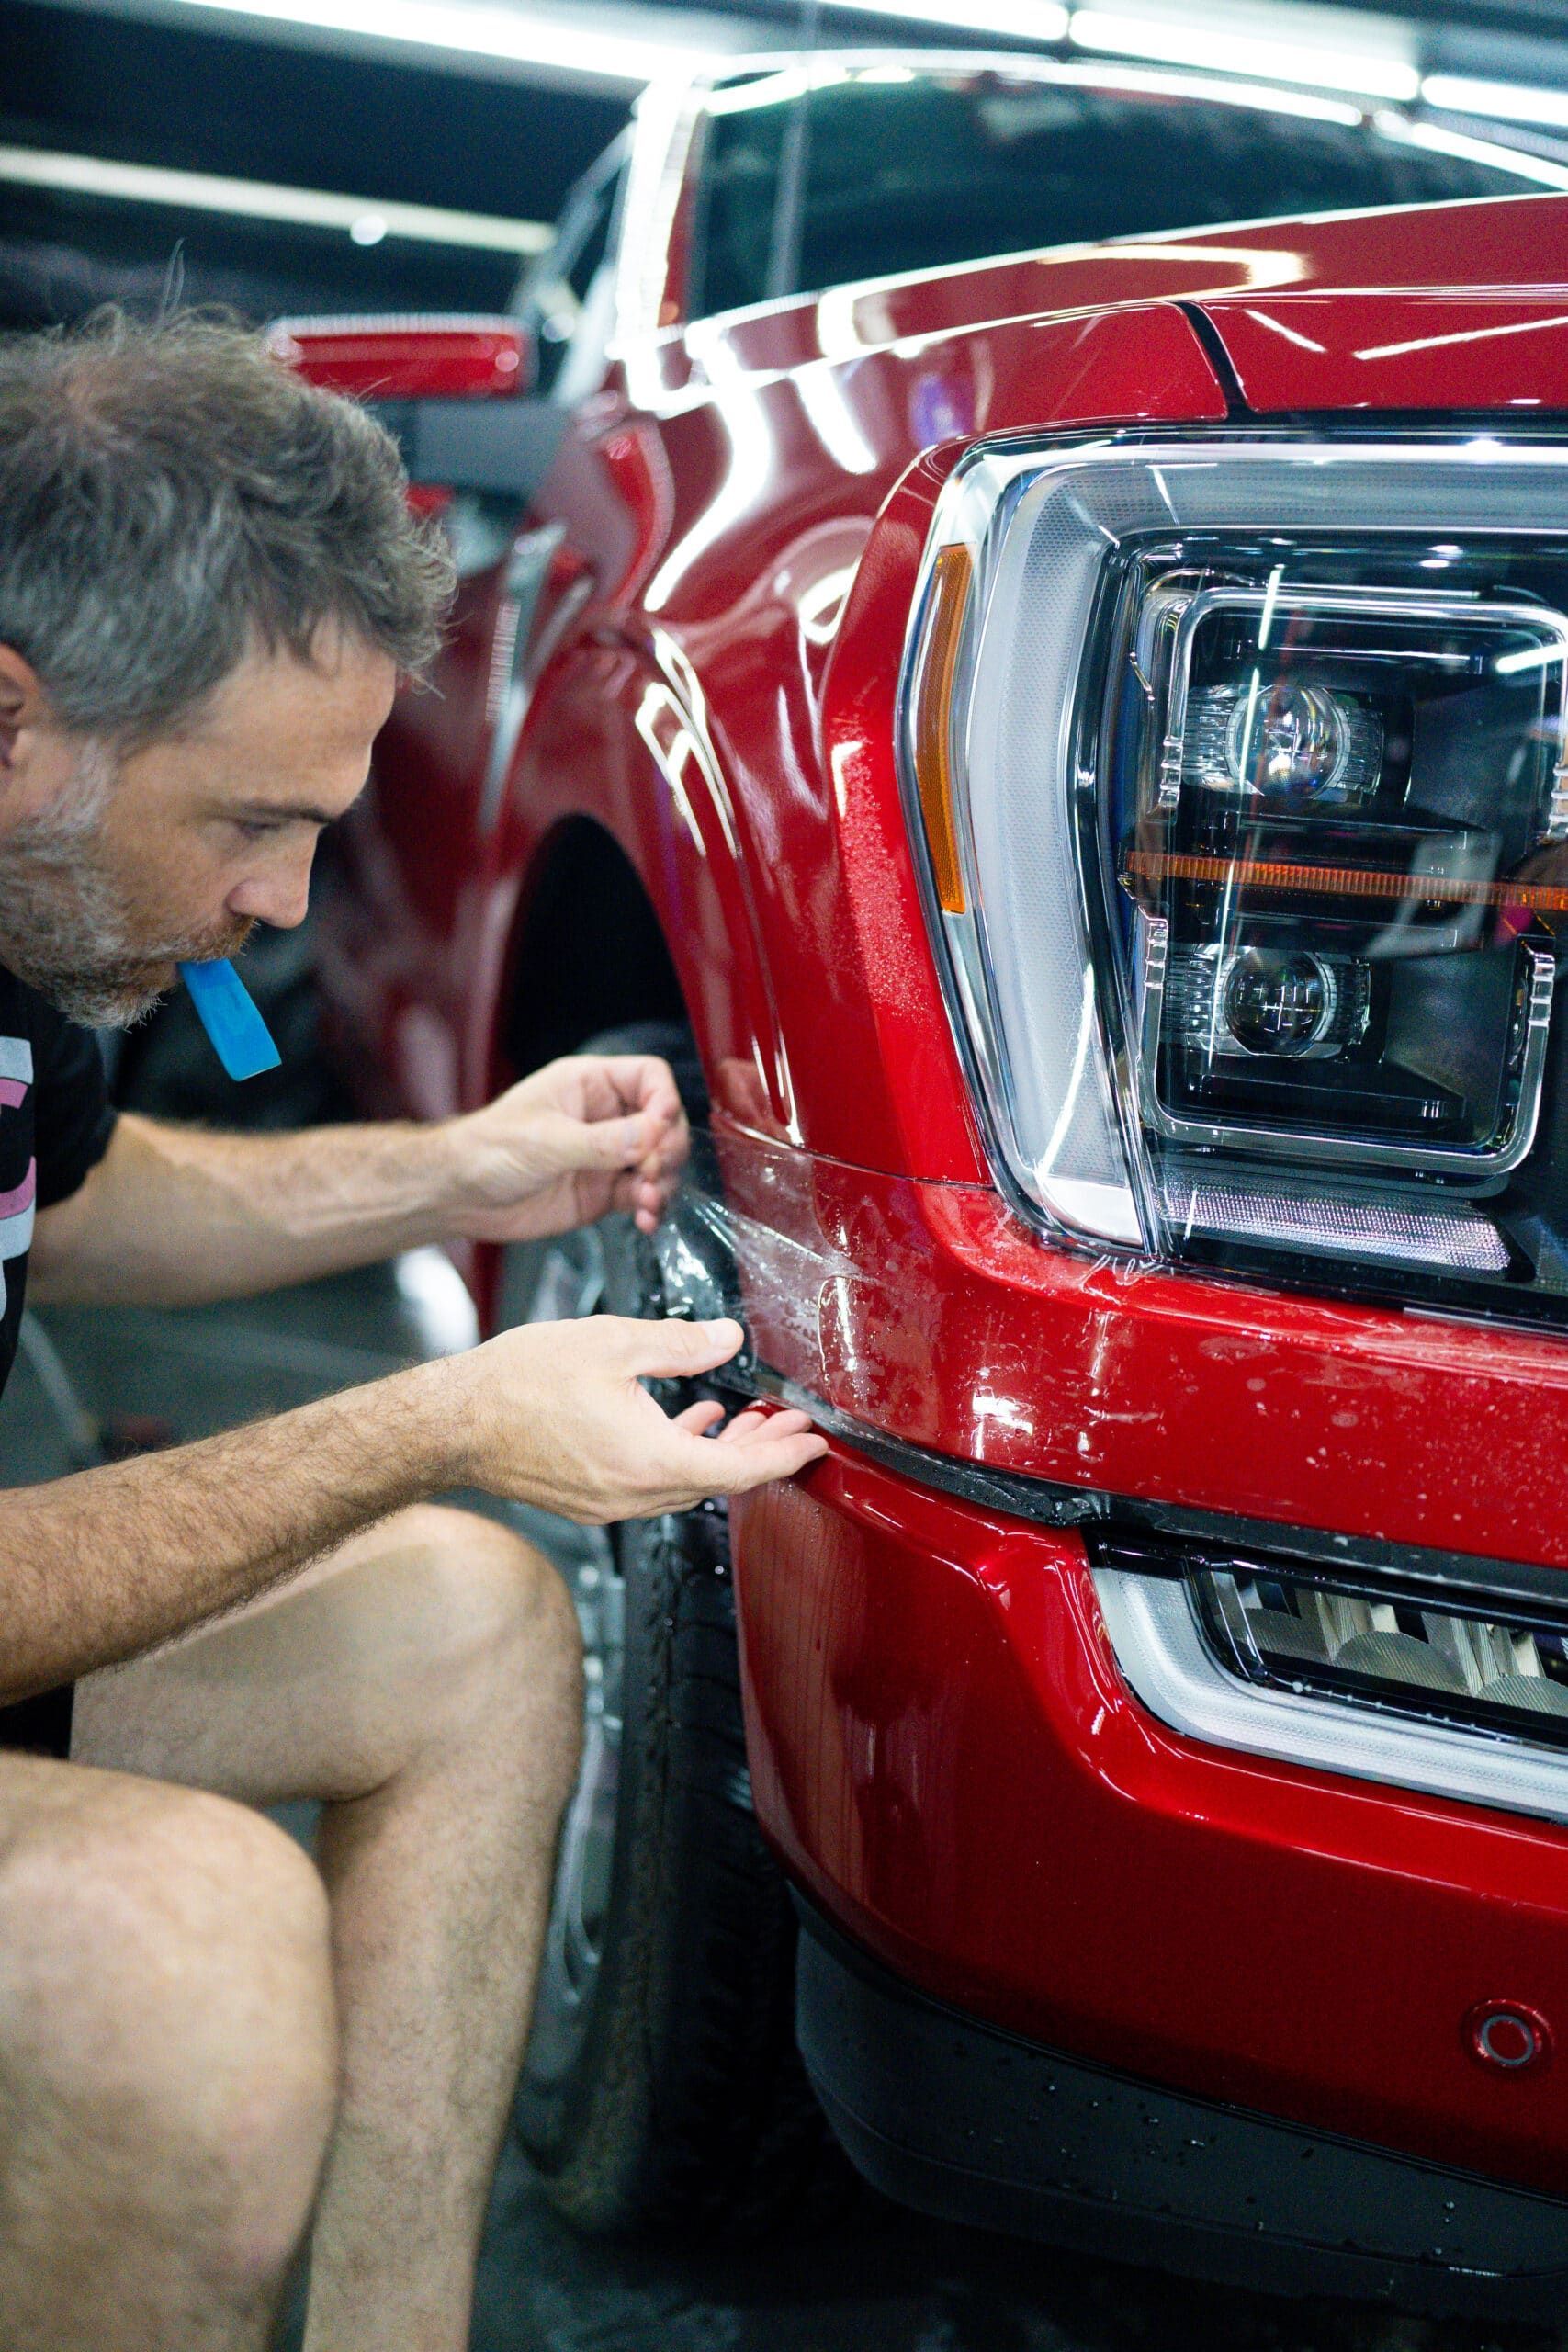 A man is applying a protective film to the front of a red truck.